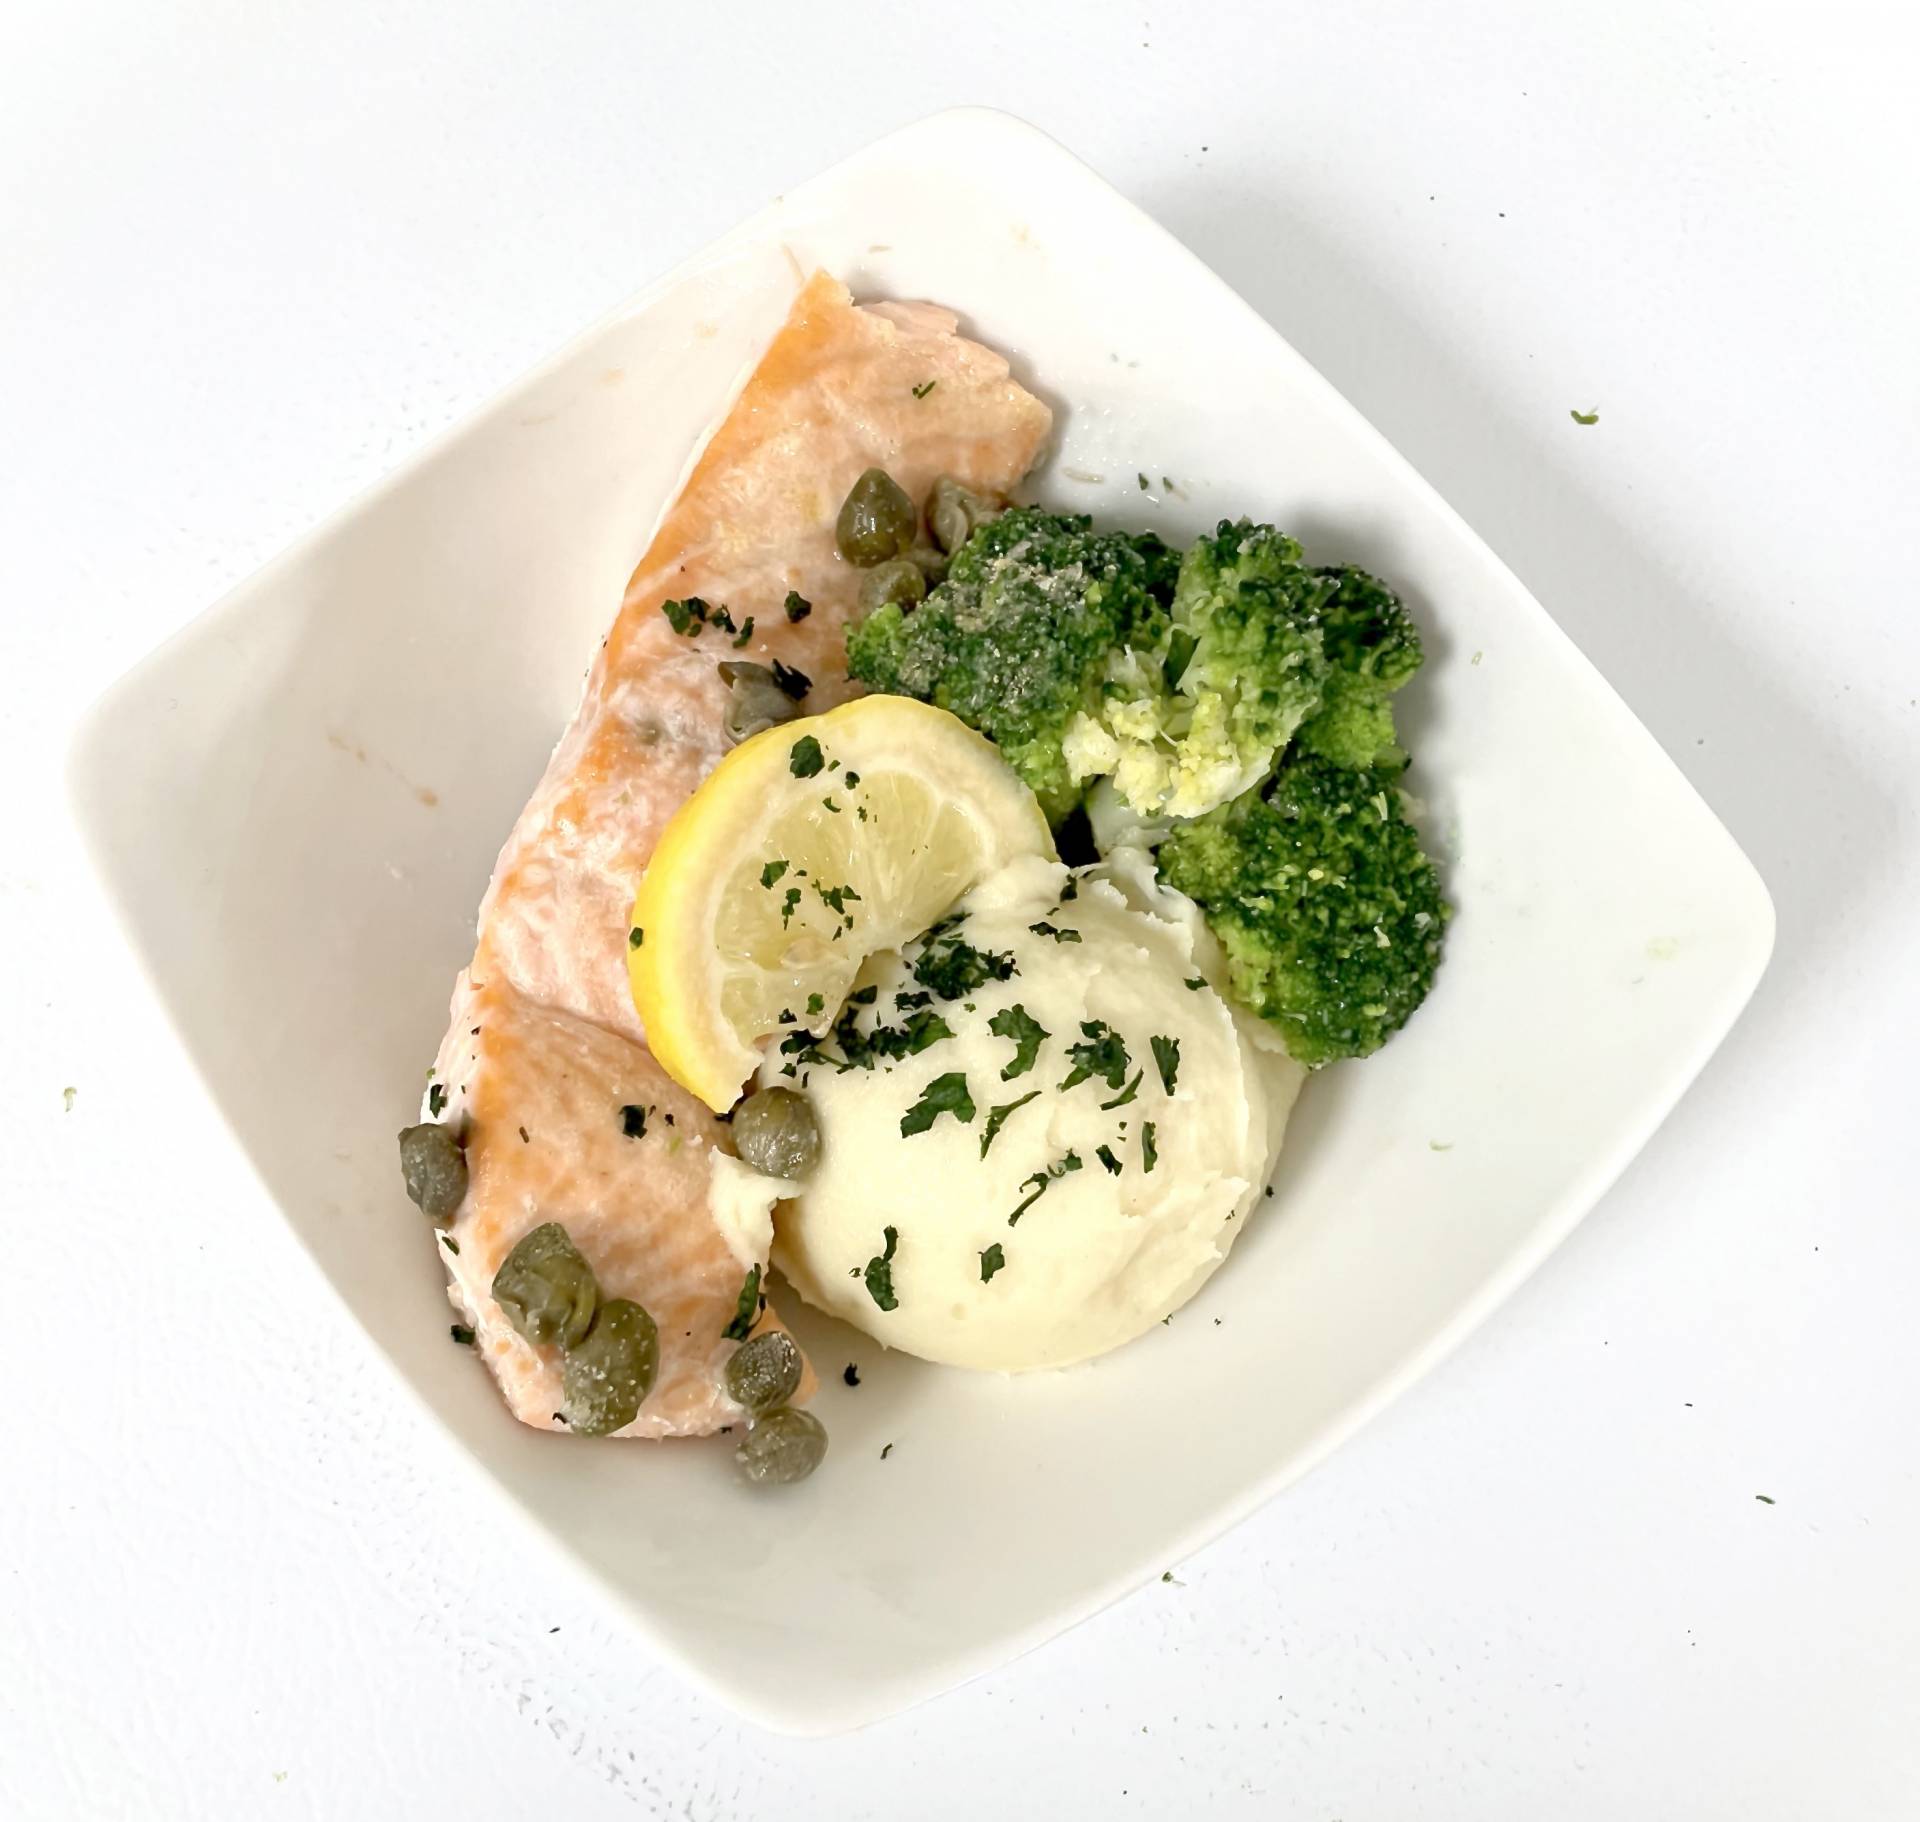 Baked Salmon with a Lemon Caper Butter Sauce and Cauliflower Mashed Potatoes - Keto